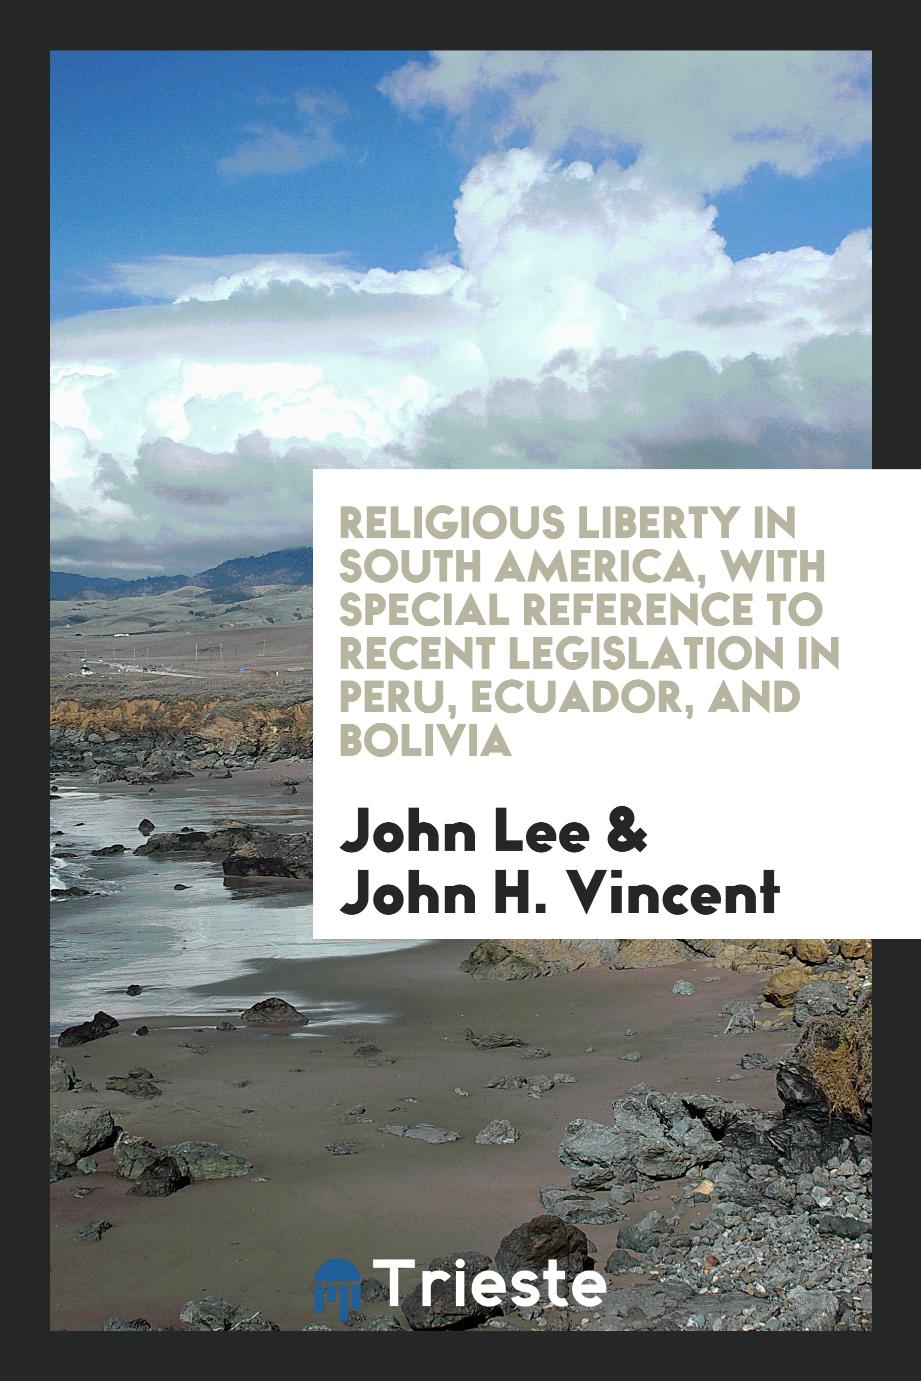 Religious liberty in South America, with special reference to recent legislation in Peru, Ecuador, and Bolivia